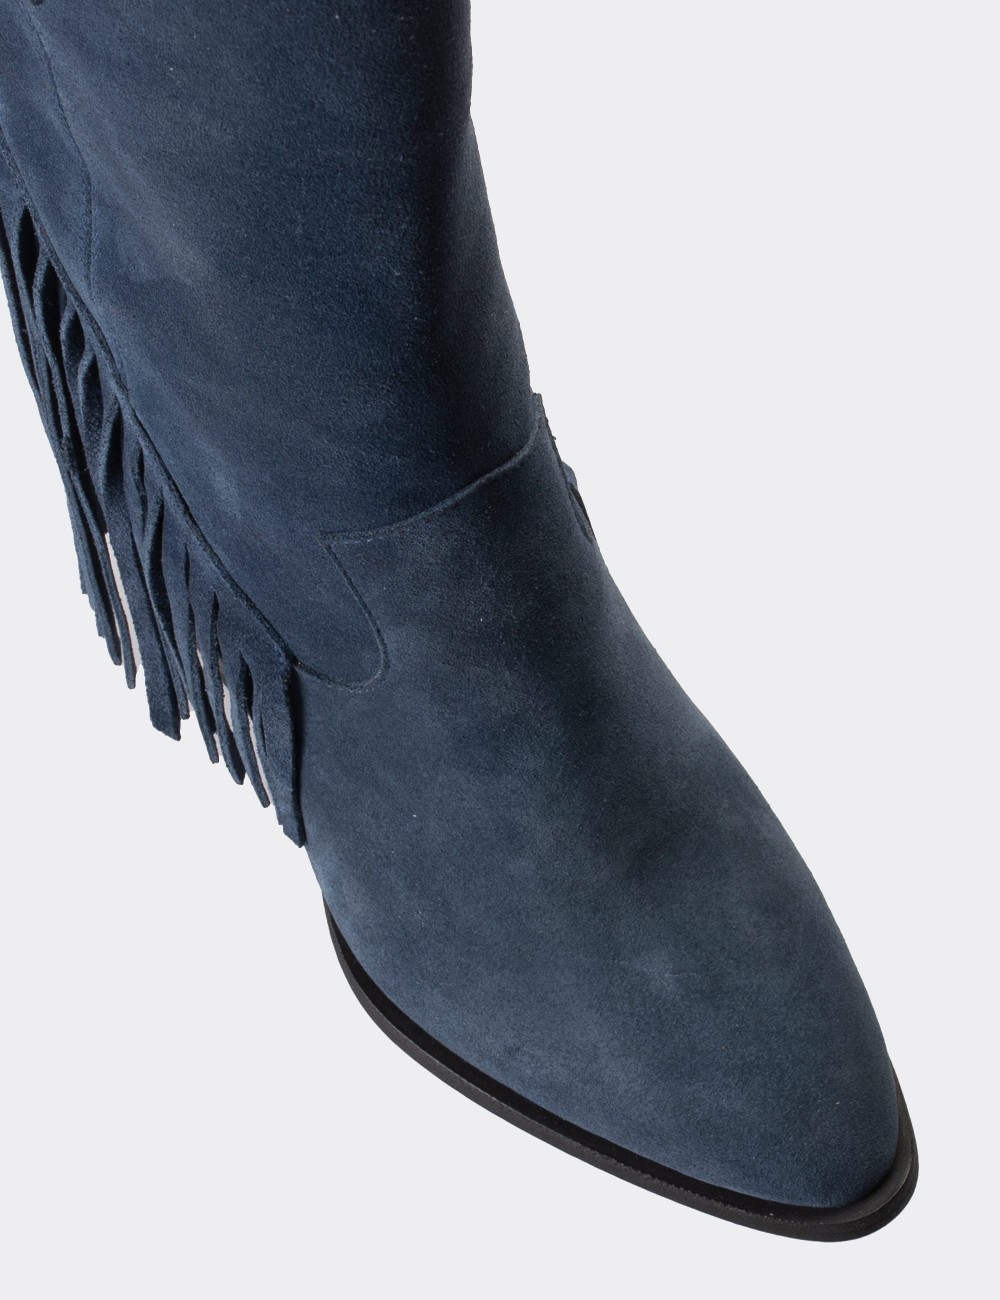 Blue Suede Leather Boots - E4467ZMVIC01